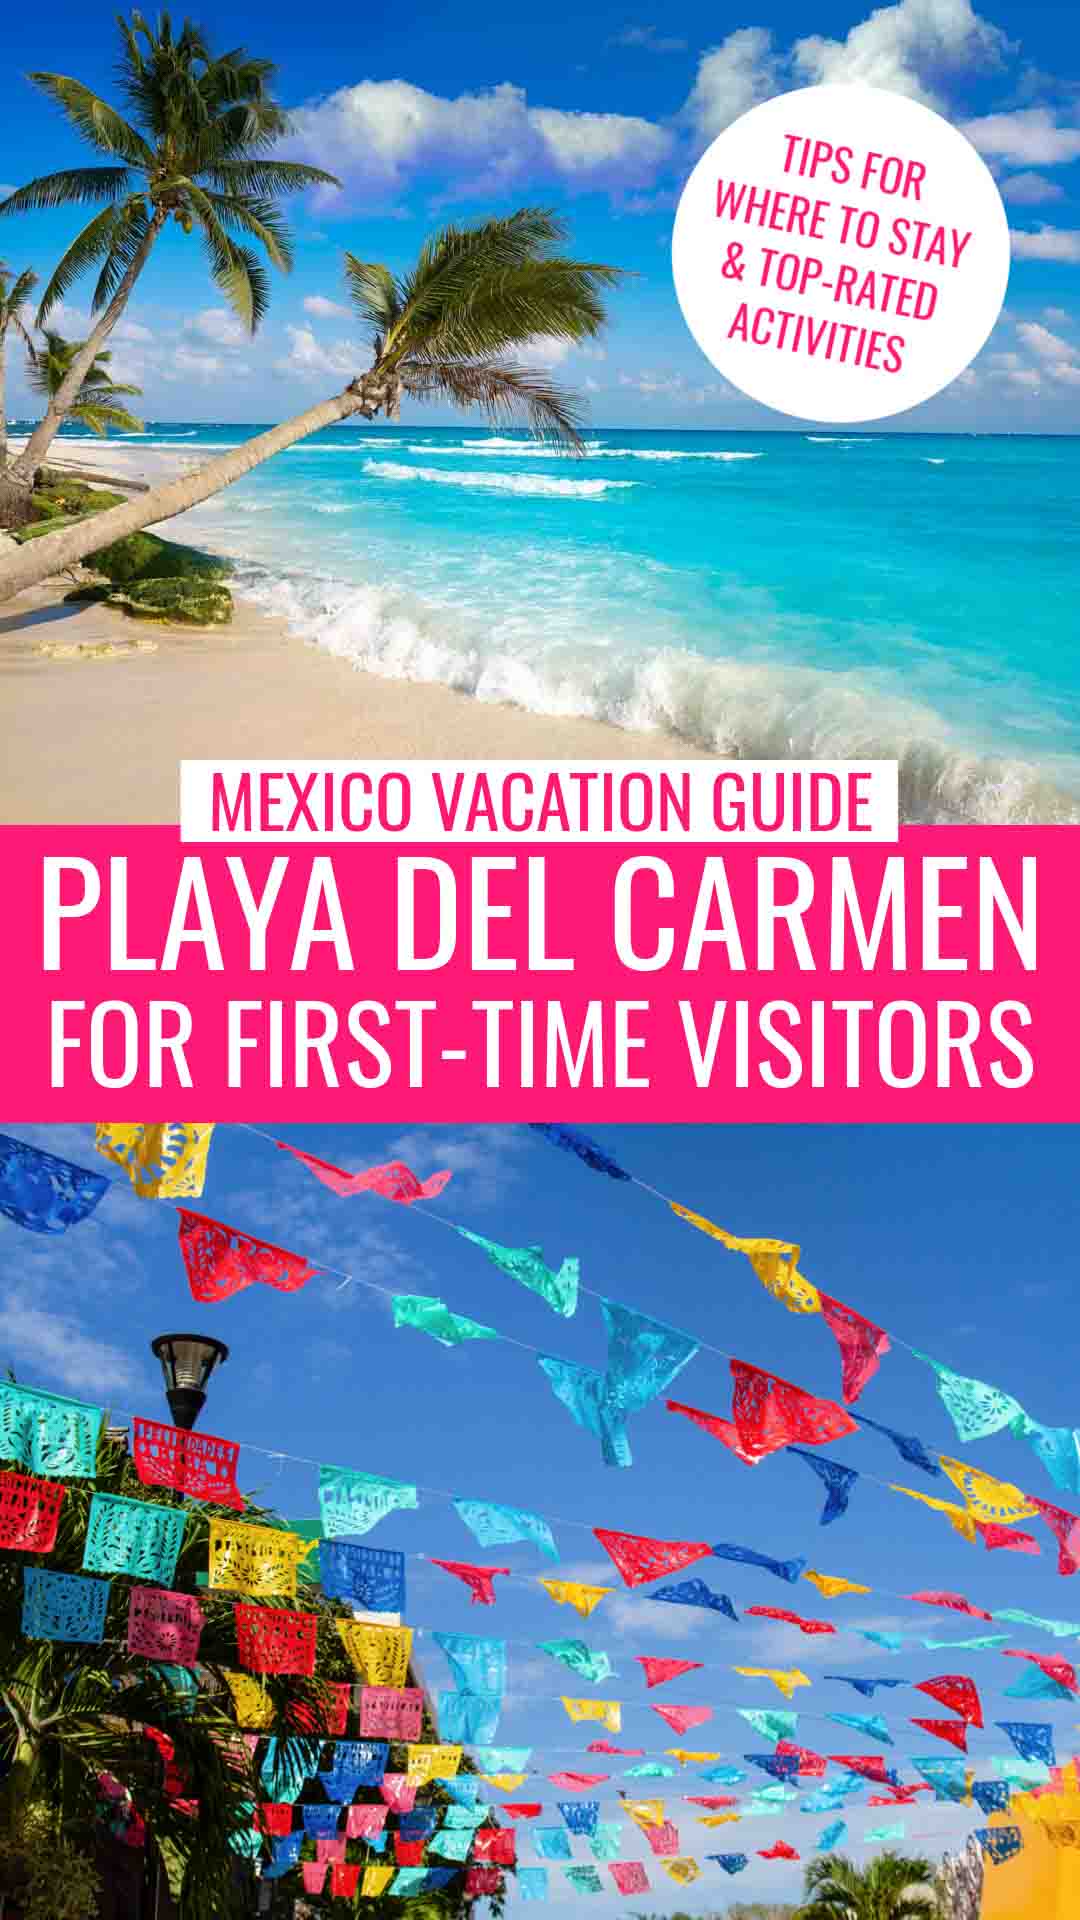 Collage of tropical beach with palm trees swaying over clear, bright aqua water and waves crashing onto sandy beach and bottom image of colorful Mexican papel picado with text overlay stating "Mexico Vacation Guide: Playa del Carmen for First-Time Visitors"